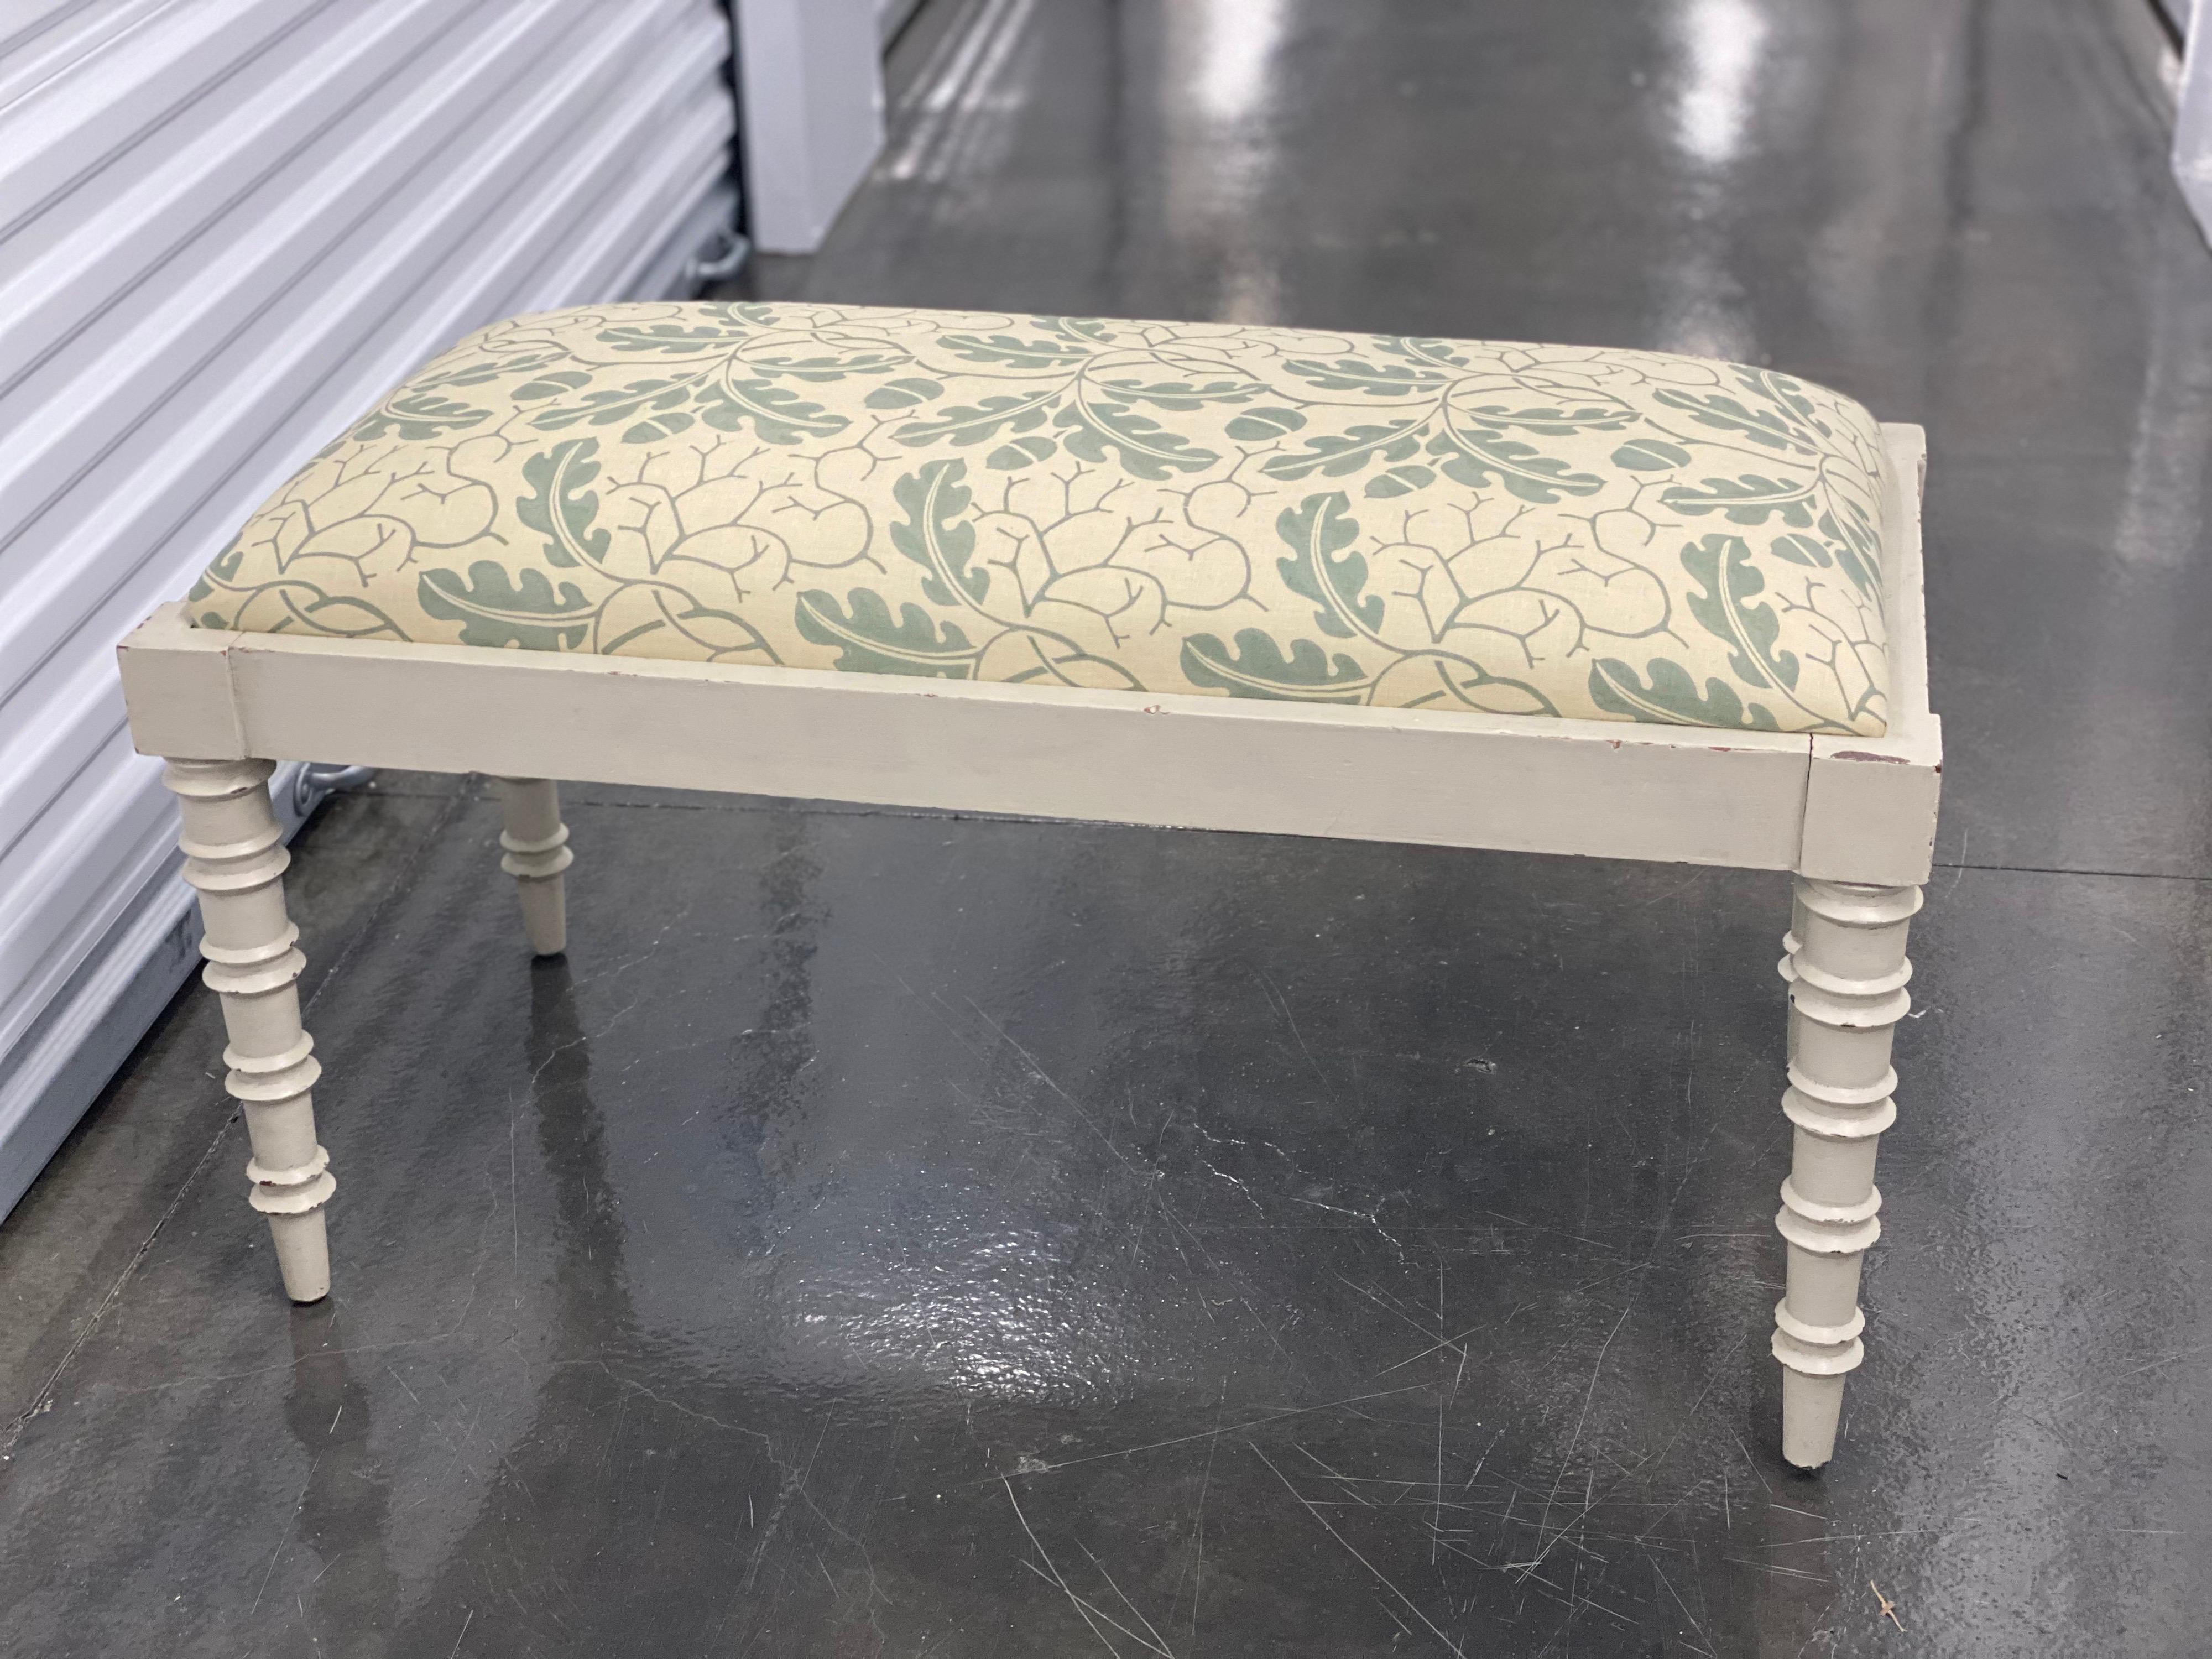 White bamboo style painted bench covered in Robert Kime Oak Leaf fabric.
This bench features a rectangular upholstered drop-in seat covered in Robert Kime Oak Leaf Fabric . The bench frame has four turned legs, mimicking a faux bamboo style, which